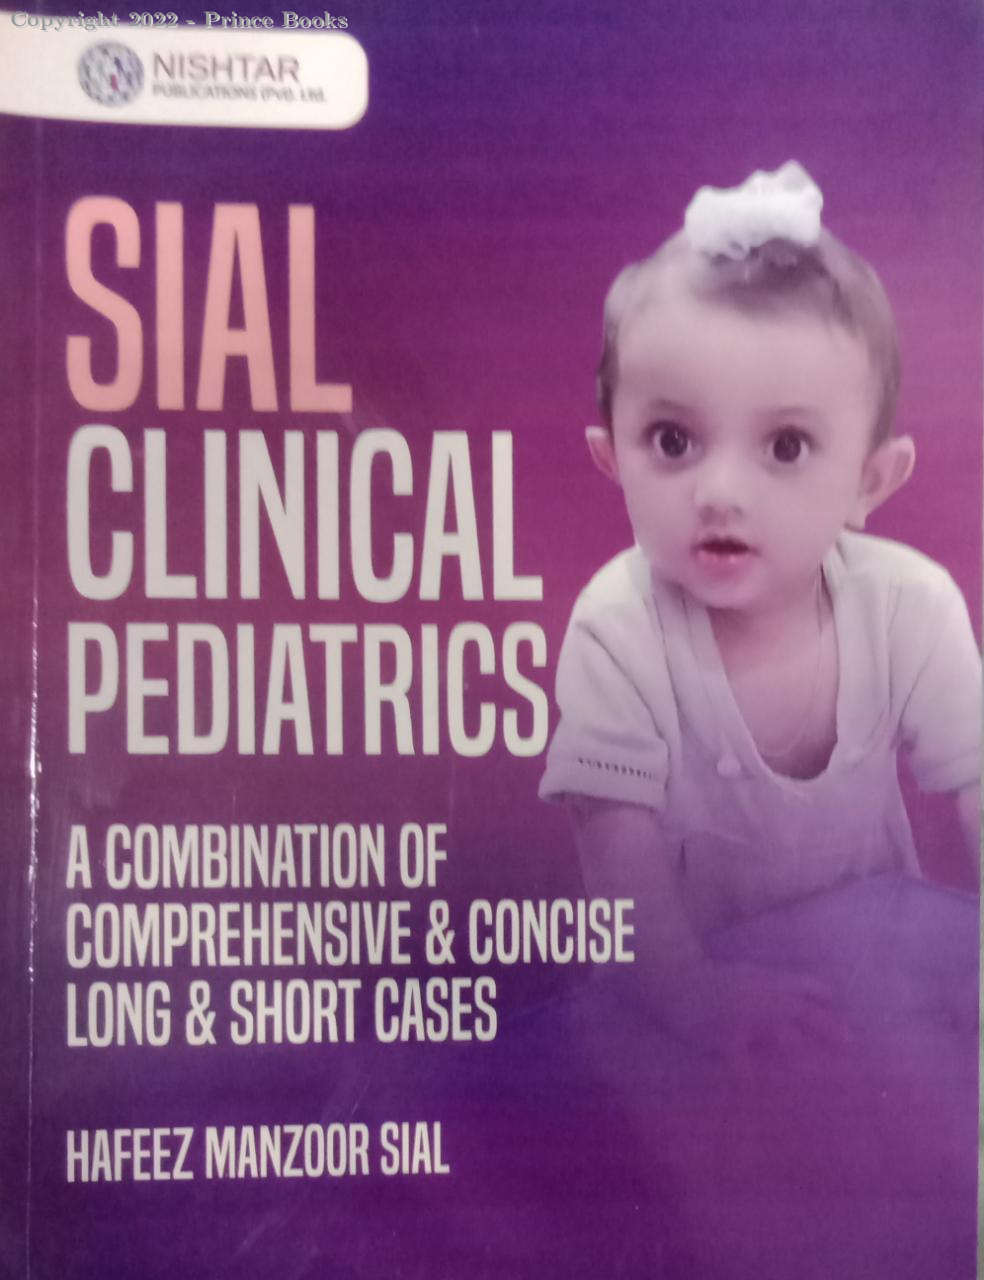 sial clinical pediatrics a combination of comprehensive & concise long & short cases